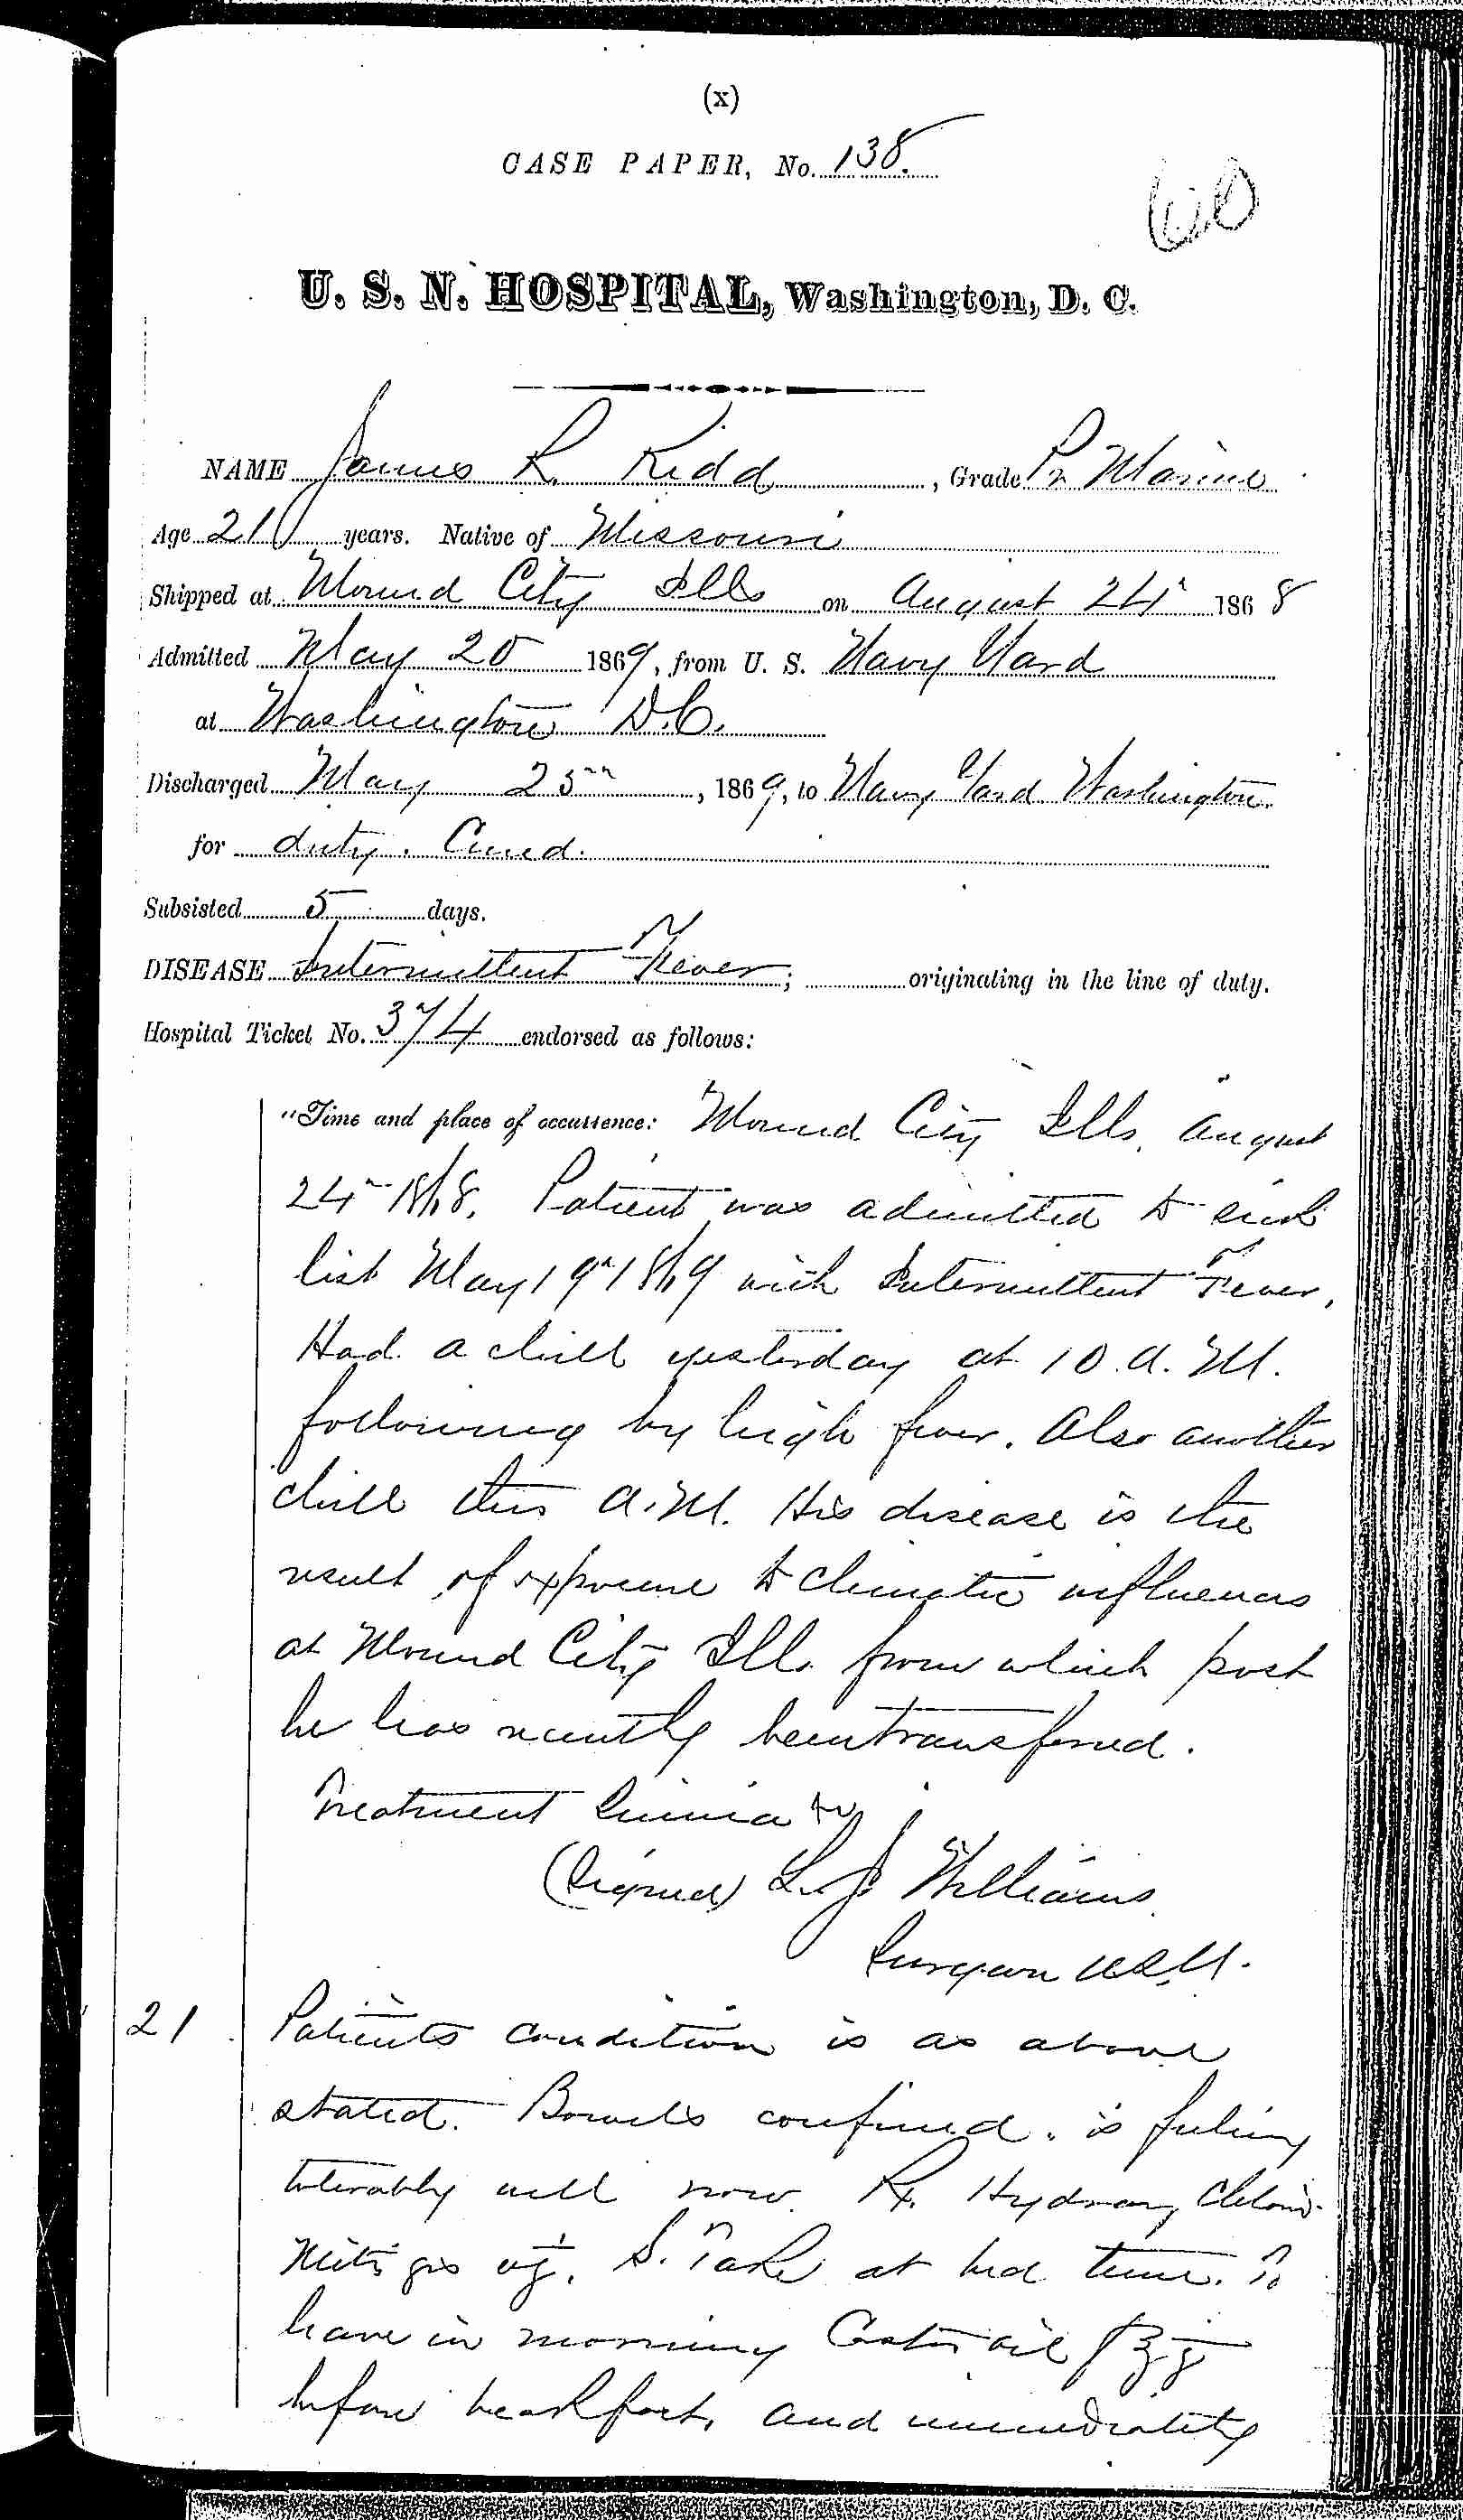 Entry for James R. Kidd (page 1 of 2) in the log Hospital Tickets and Case Papers - Naval Hospital - Washington, D.C. - 1868-69